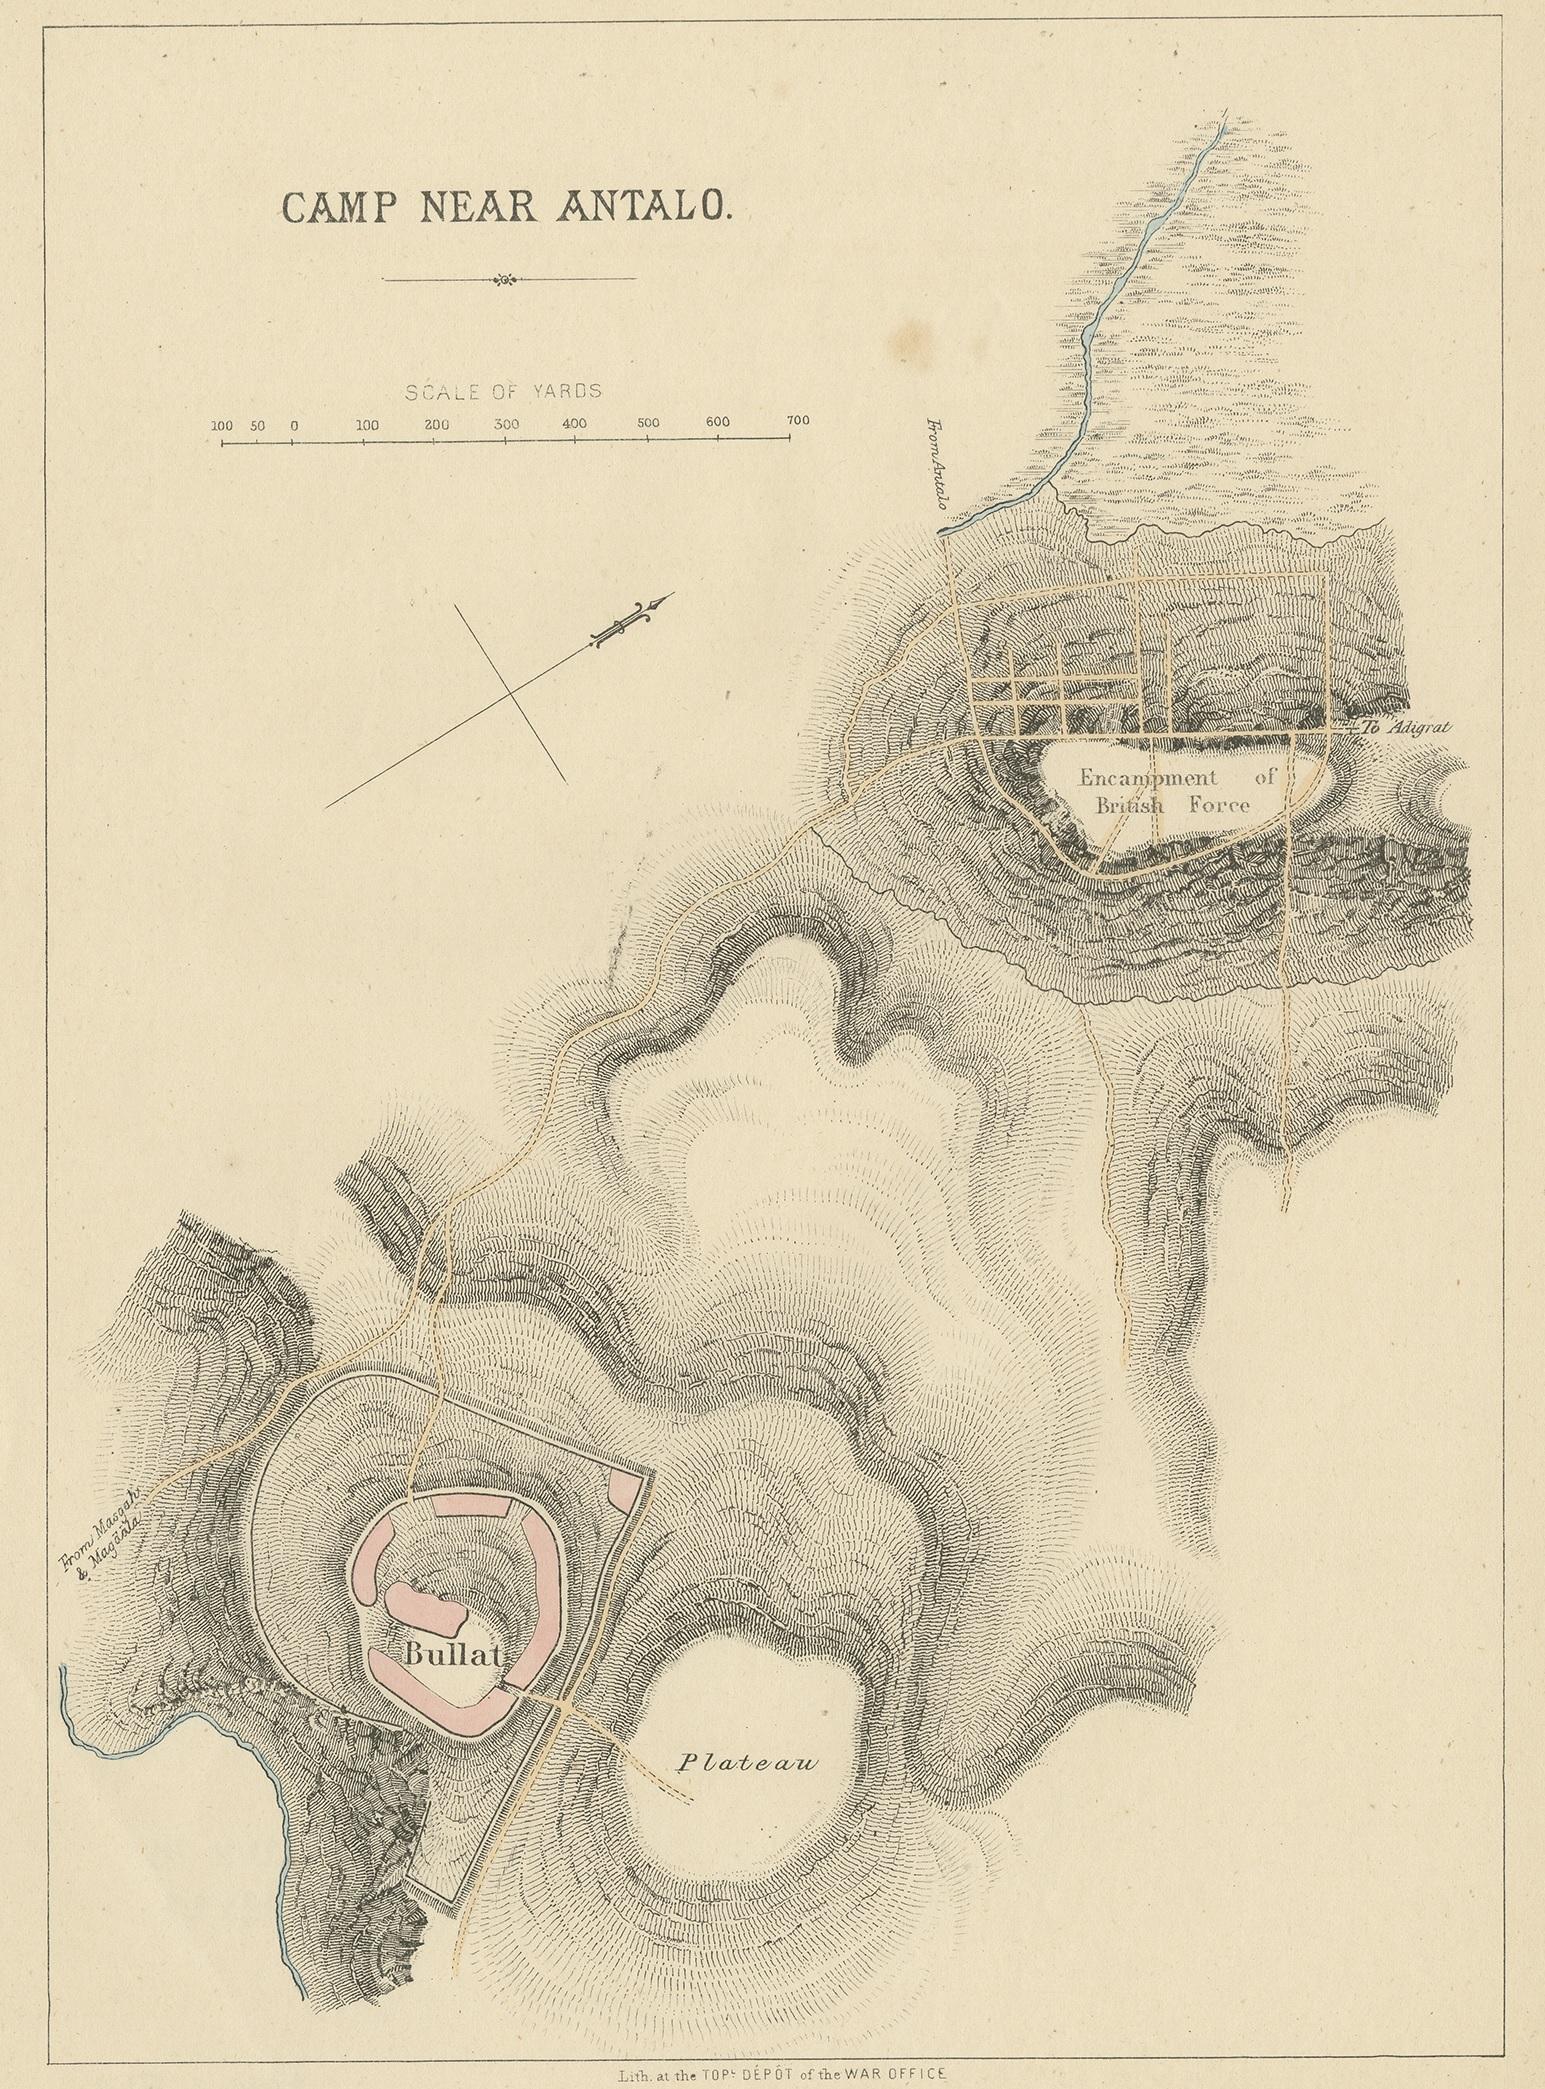 Antique print titled 'Camp near Antalo'. Lithograph with a plan of the camp near Antalo during the battle of Magdala. The Battle of Magdala was the conclusion of the British Expedition to Abyssinia fought in April 1868 between British and Abyssinian